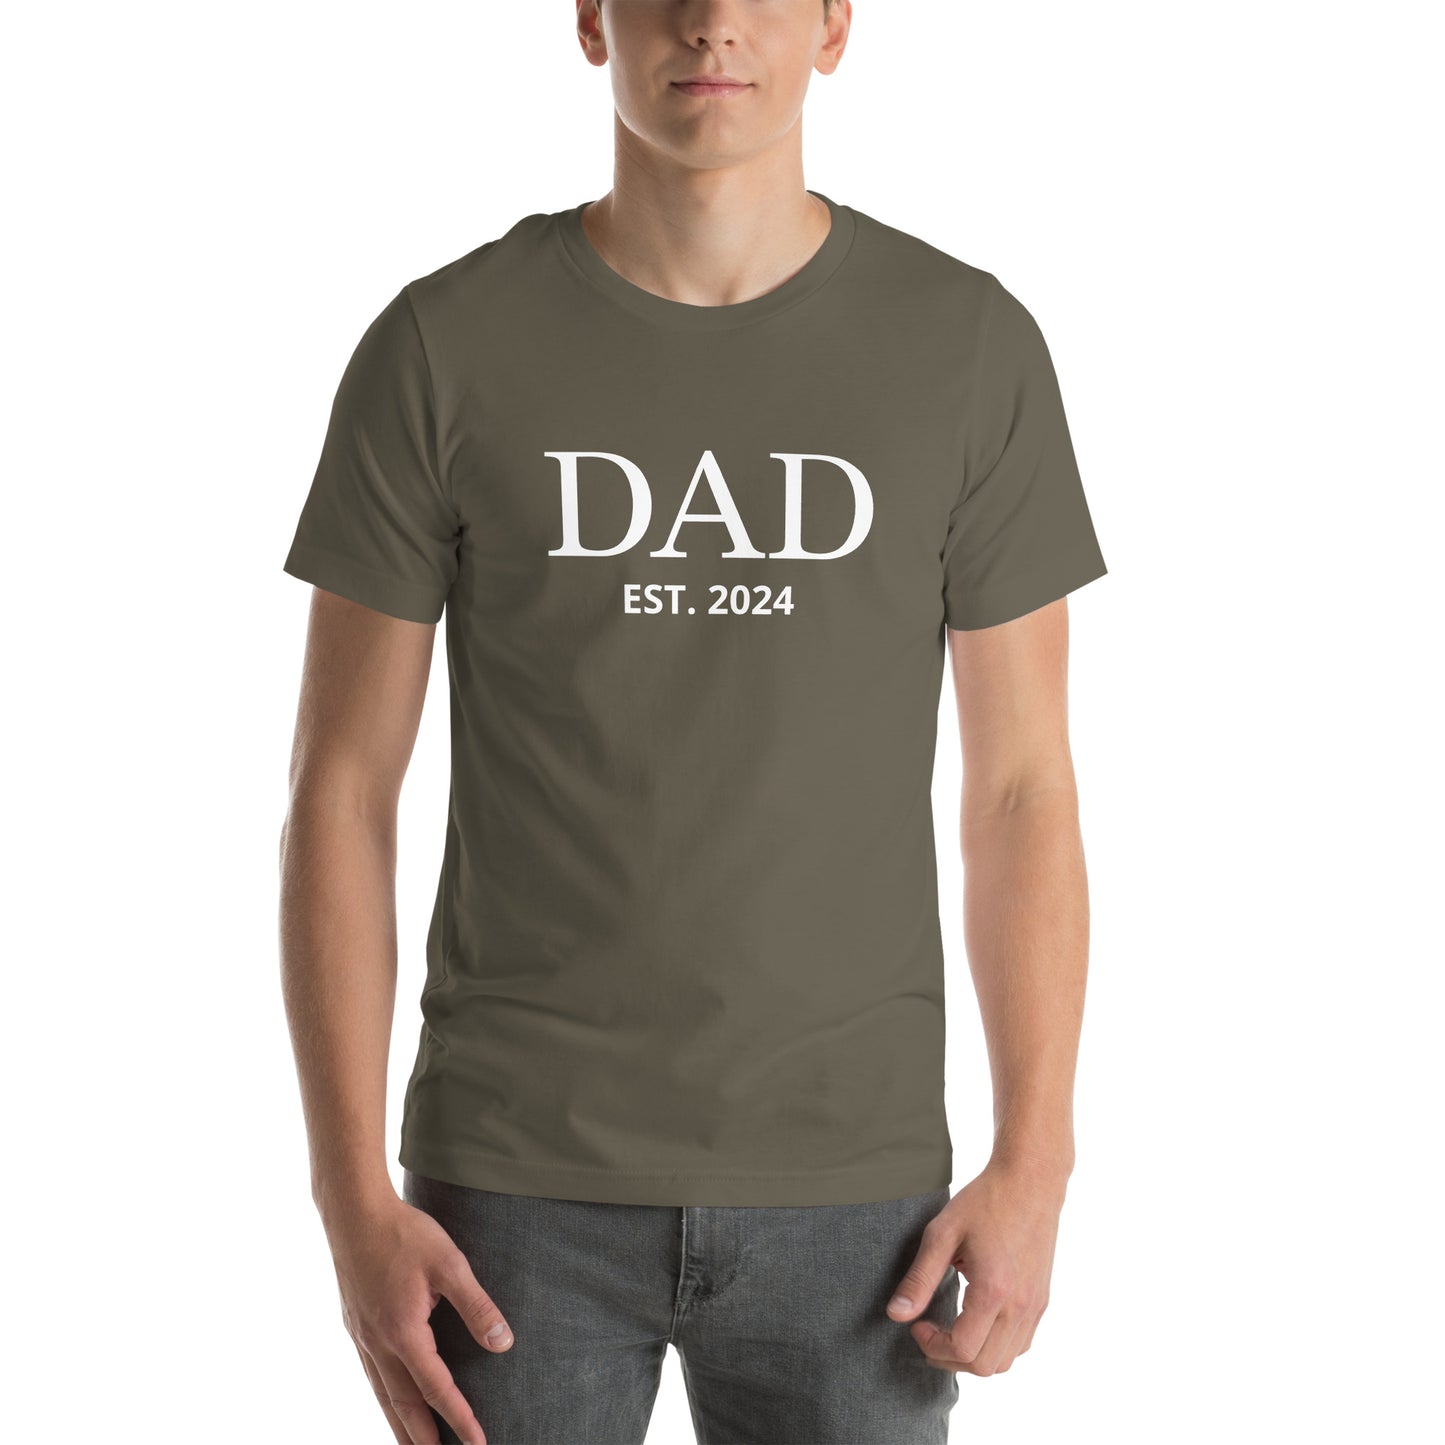 T-shirt for Men | Dad Est 2024 | Funny Shirt Men - Gift for Dad - Fathers Day Gift - New Dad TShirt - Anniversary Gift - Newborn Tee